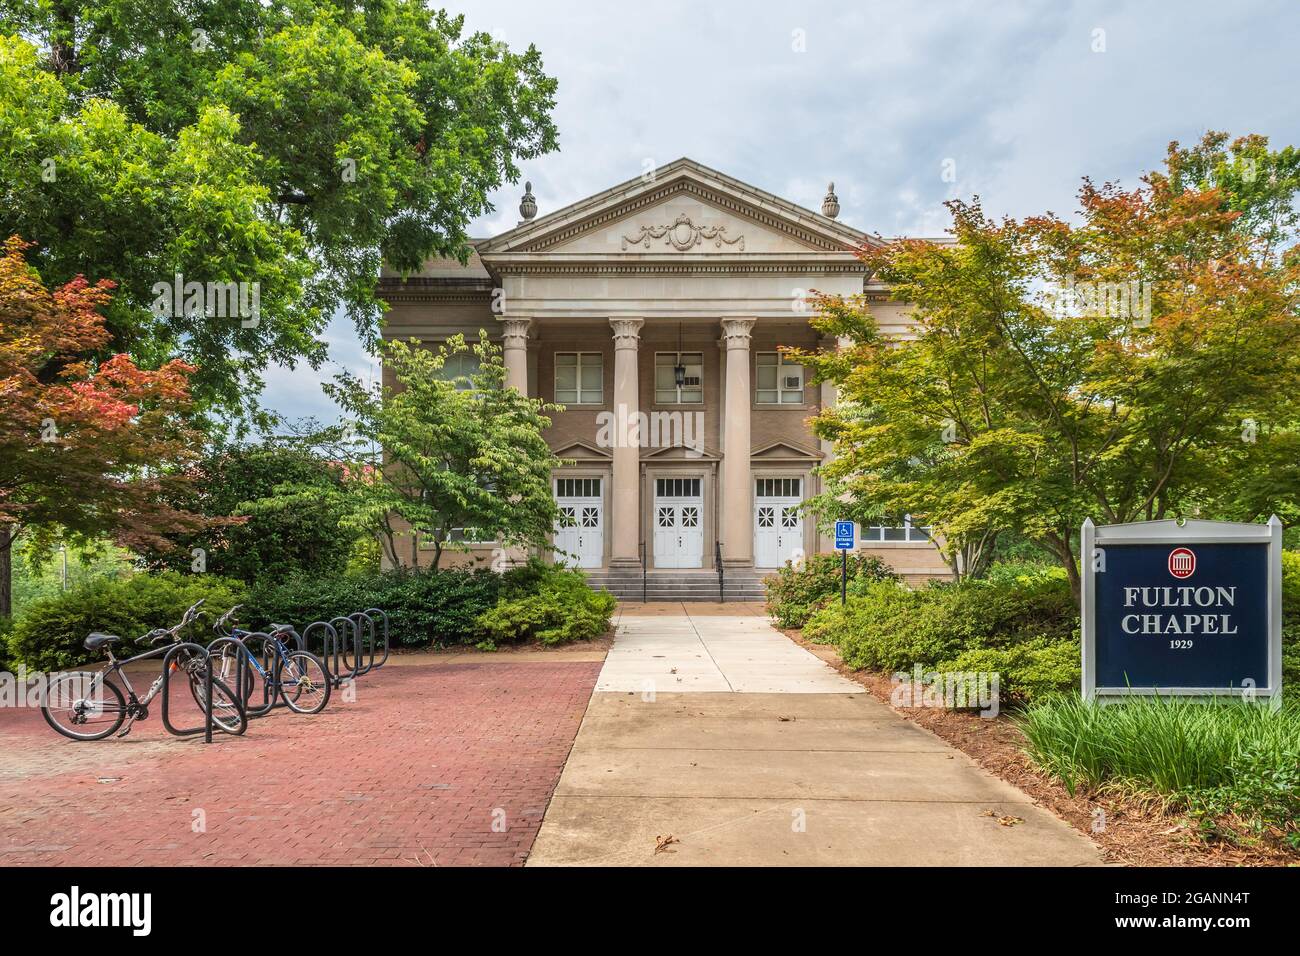 Fulton Chapel built in 1929 in Classic Revival style architecture at the University of Mississippi, Ole Miss, functions as a performing arts theatre. Stock Photo